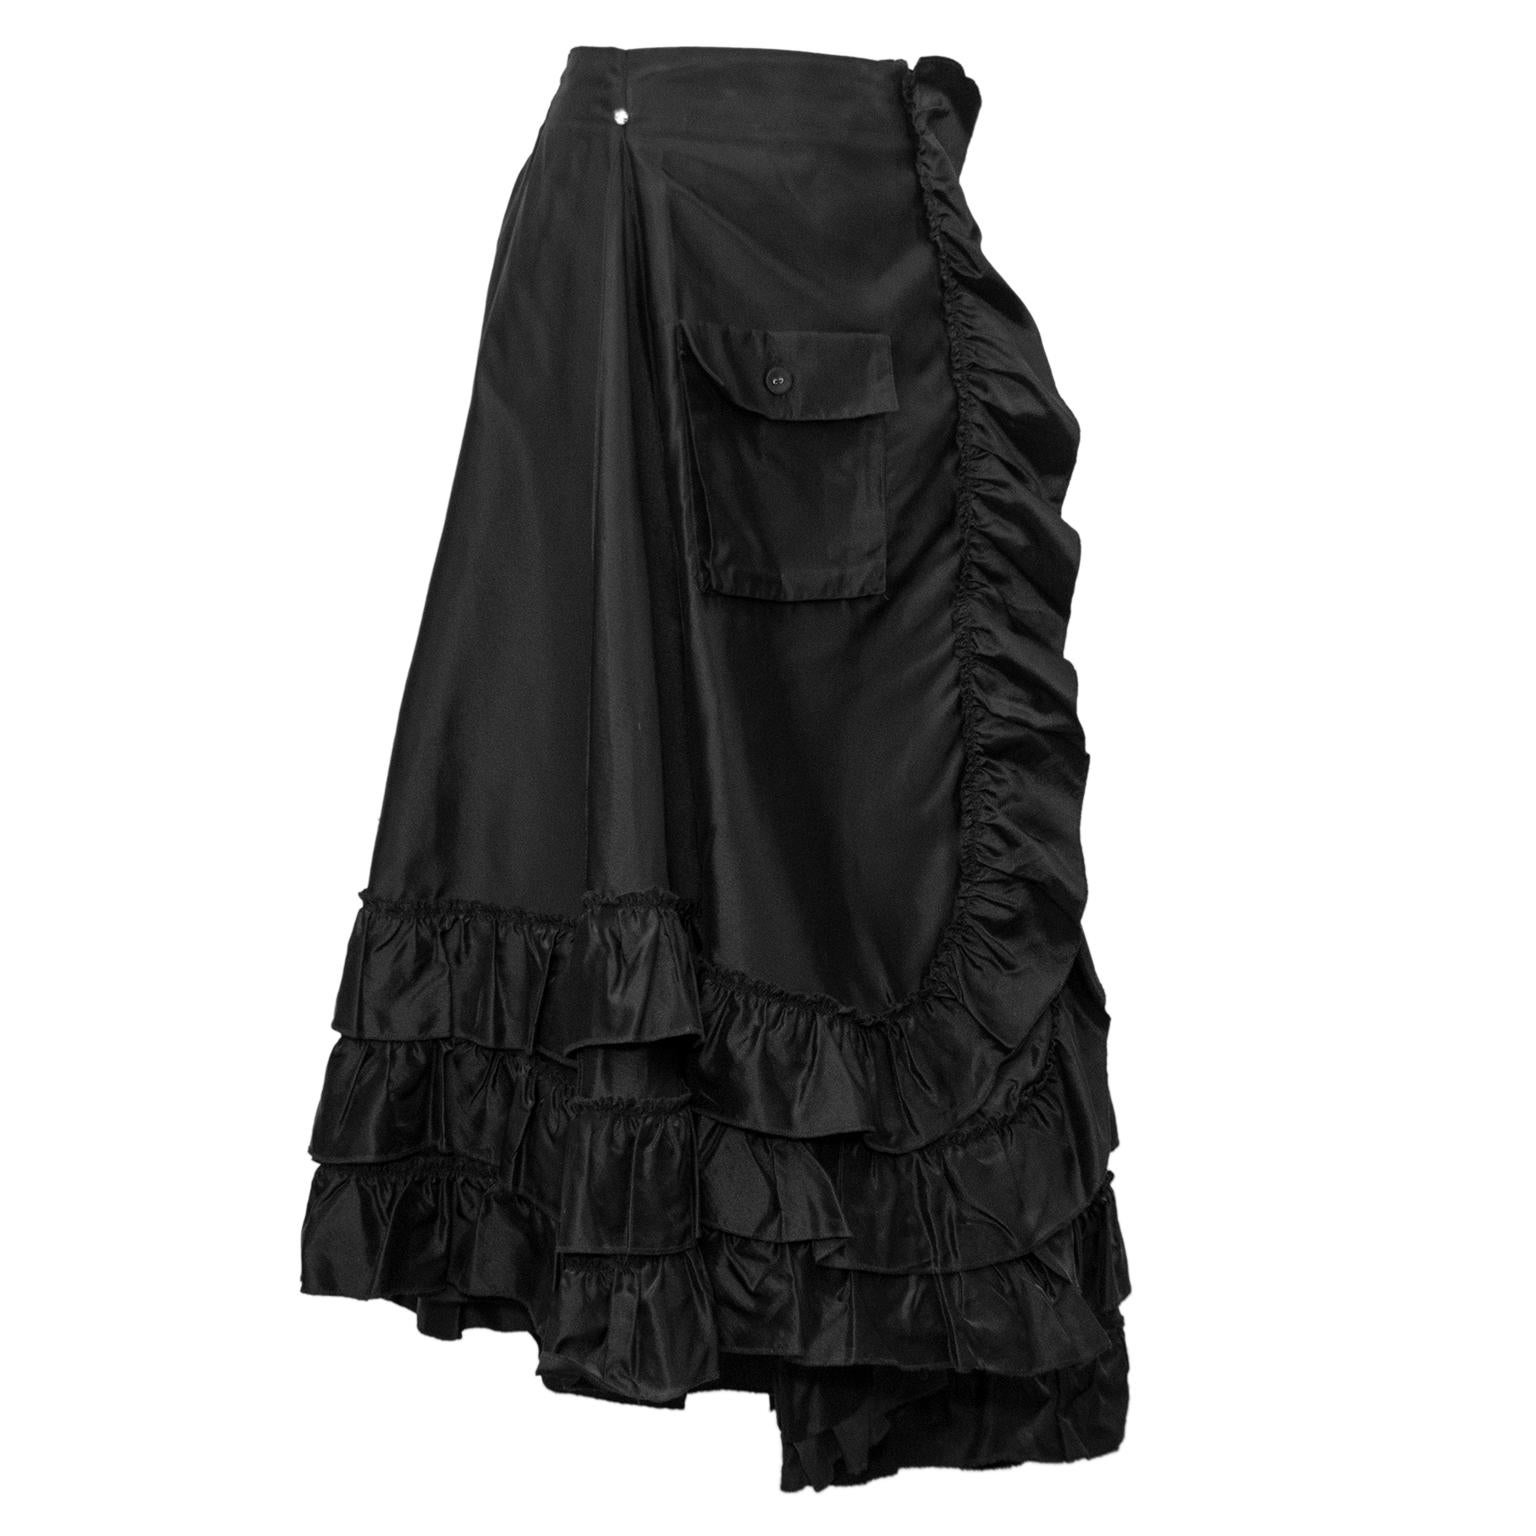 Fabulous Sonia Rykiel skirt from the 2000s. This piece is over the top, in the most perfect way. High waisted, wrap style with a diagonal cargo pocket and a large ruffled hem. A small accent rhinestone sits at the right hip when wearing. A-line